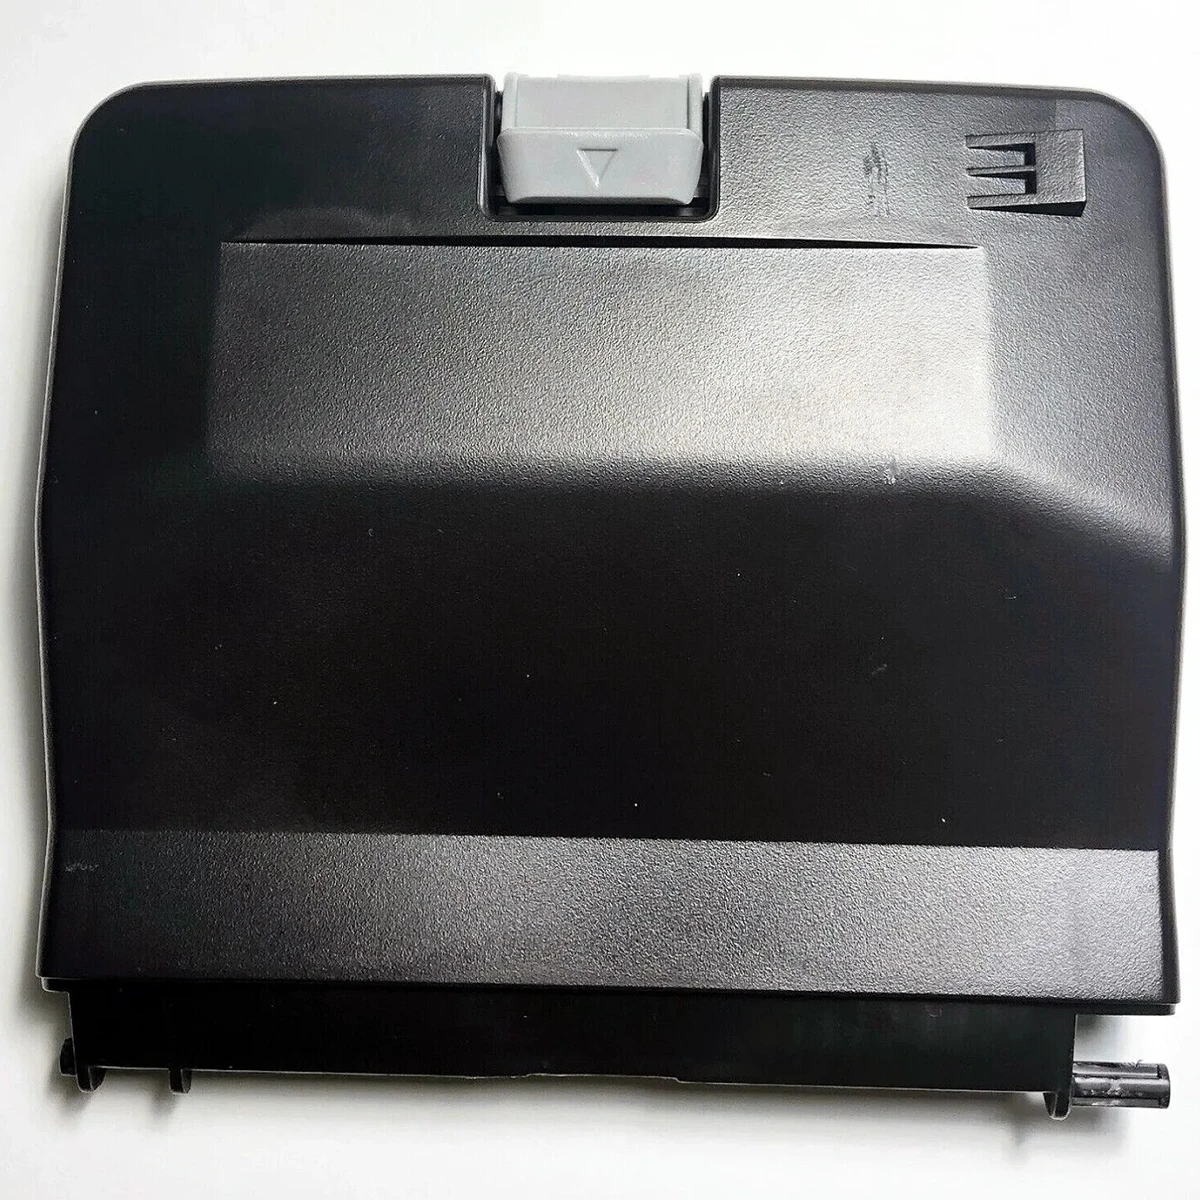 Epson Artisan 1430 Ink Carriage Top Cover